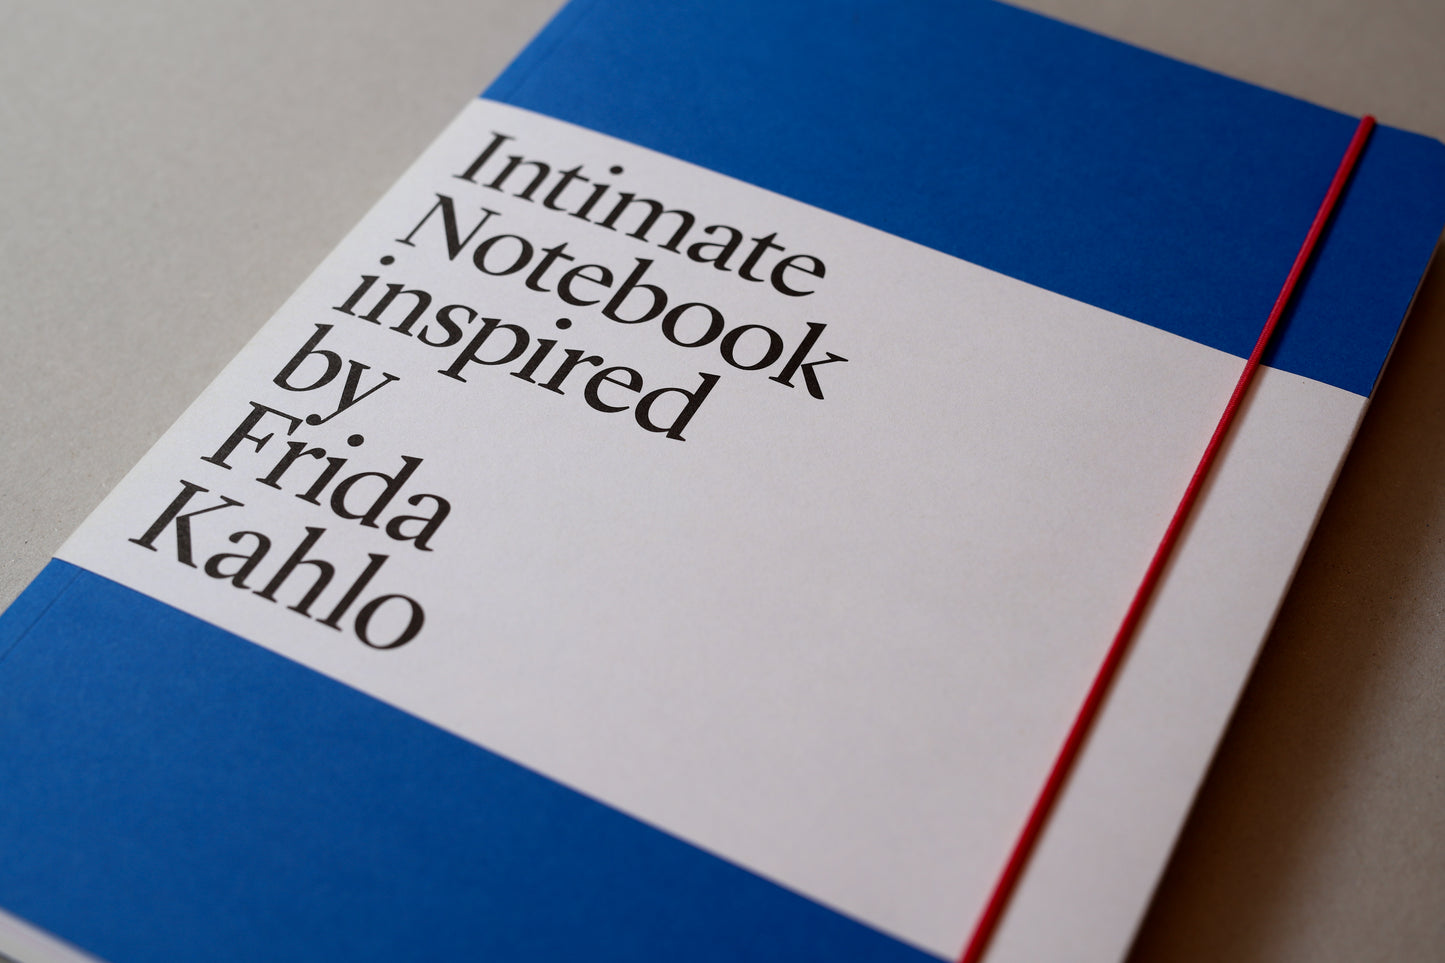 Intimate Notebook inspired in Frida Kahlo